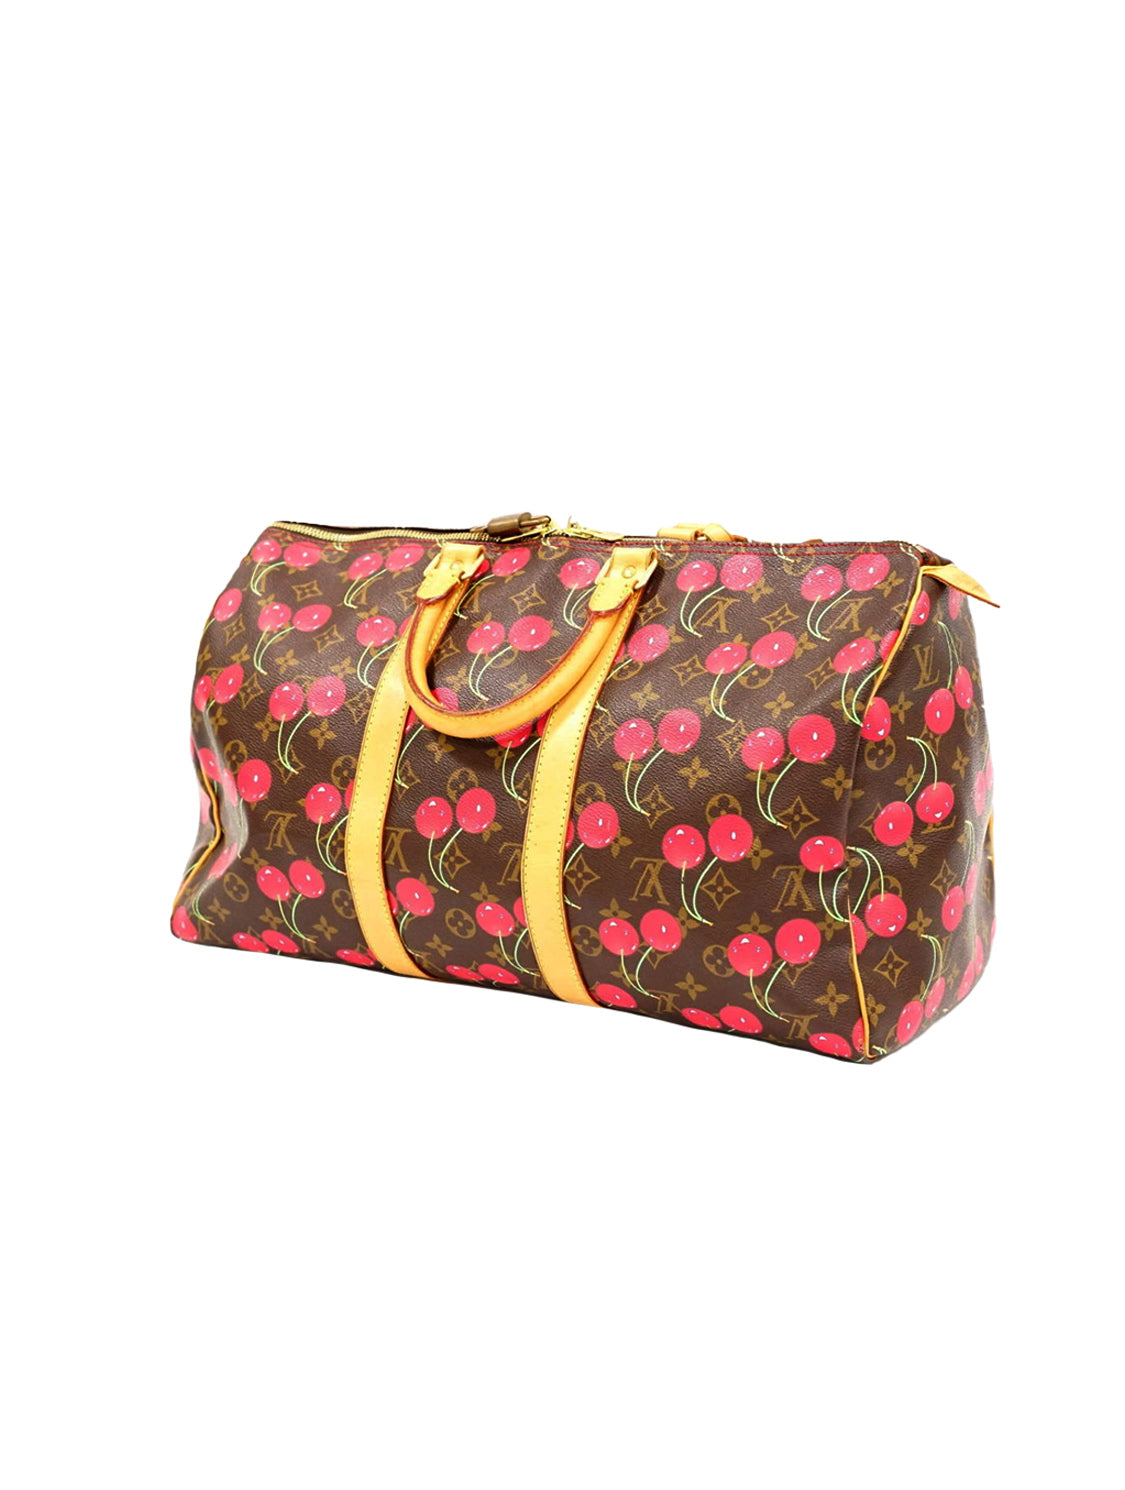 Brighten up cold winter days with this LOUIS VUITTON Travel Bag Brown  Monogram Cerise Cherry Keepall. At ww…